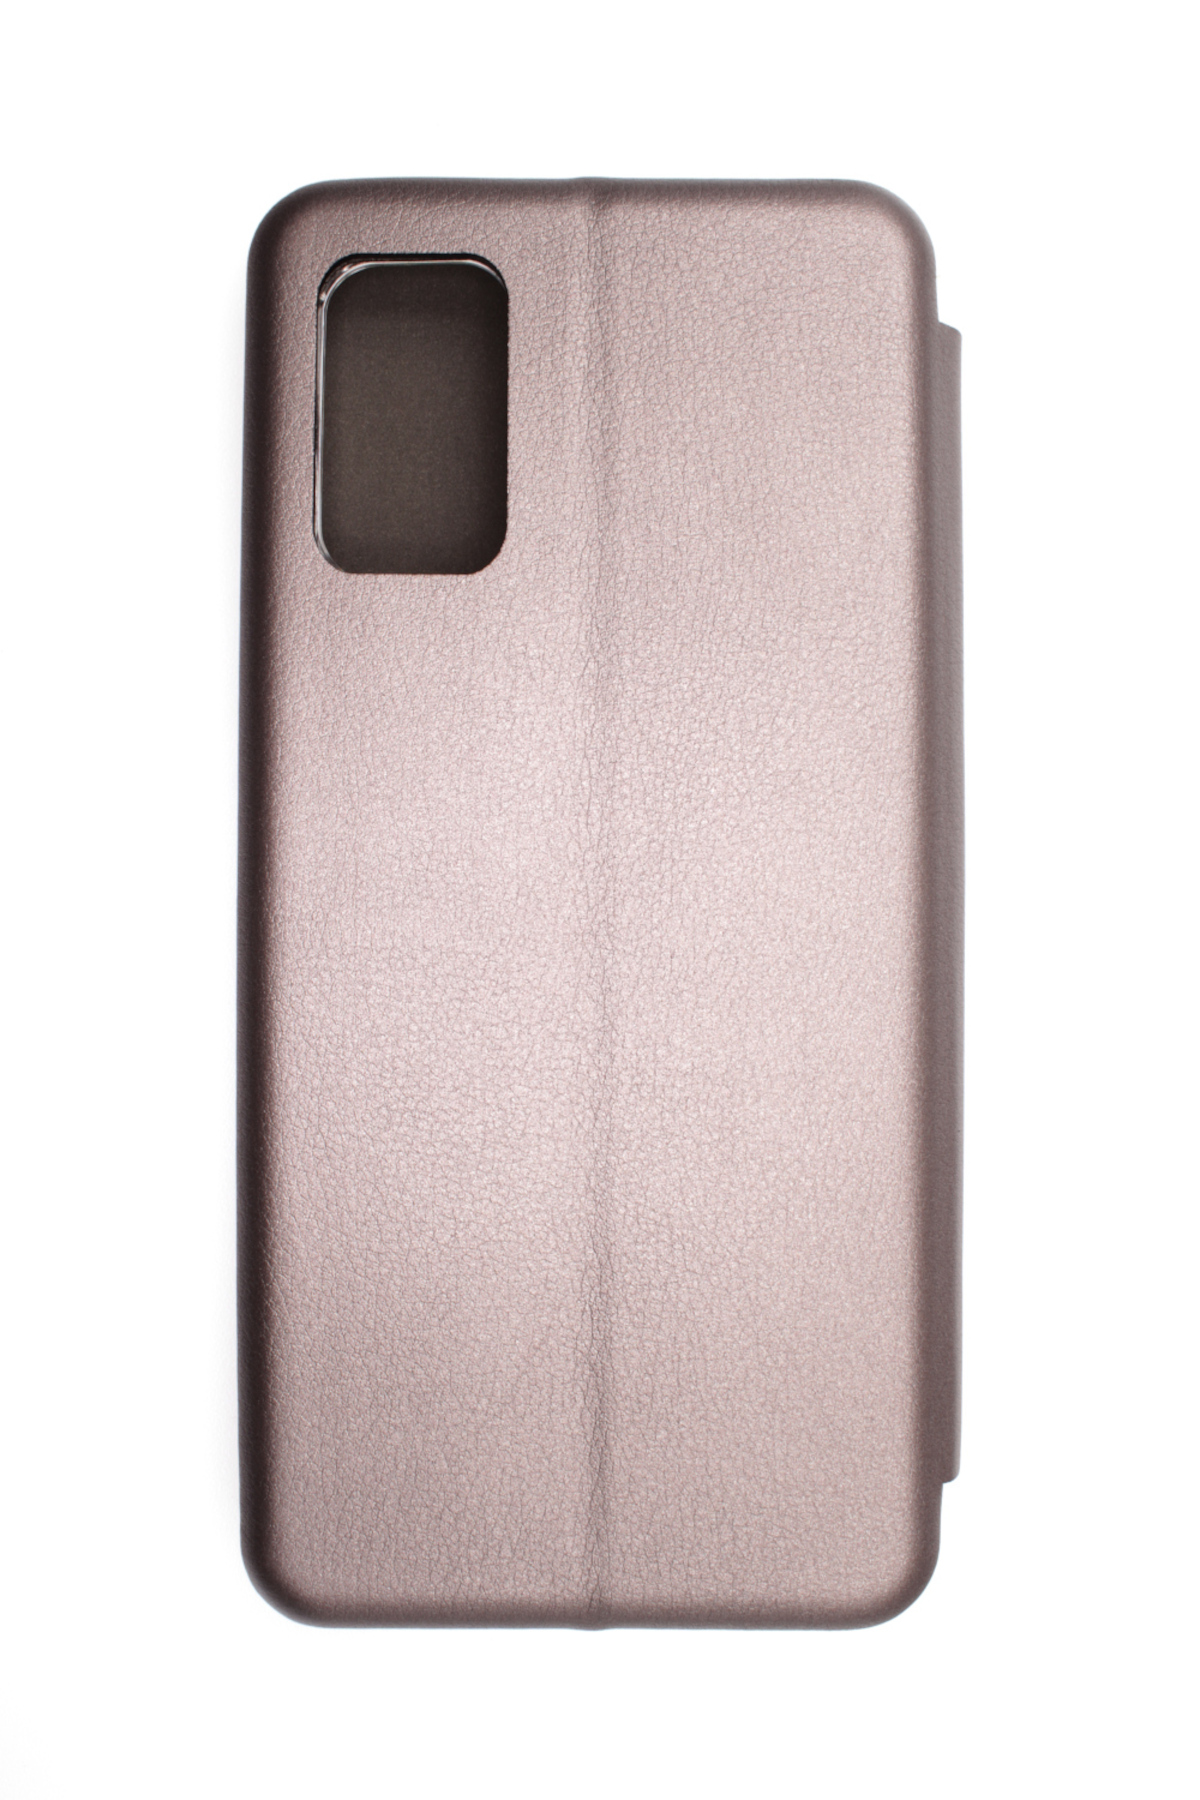 JAMCOVER Bookcase Grau Rounded, Galaxy 5G, A32 Samsung, Bookcover